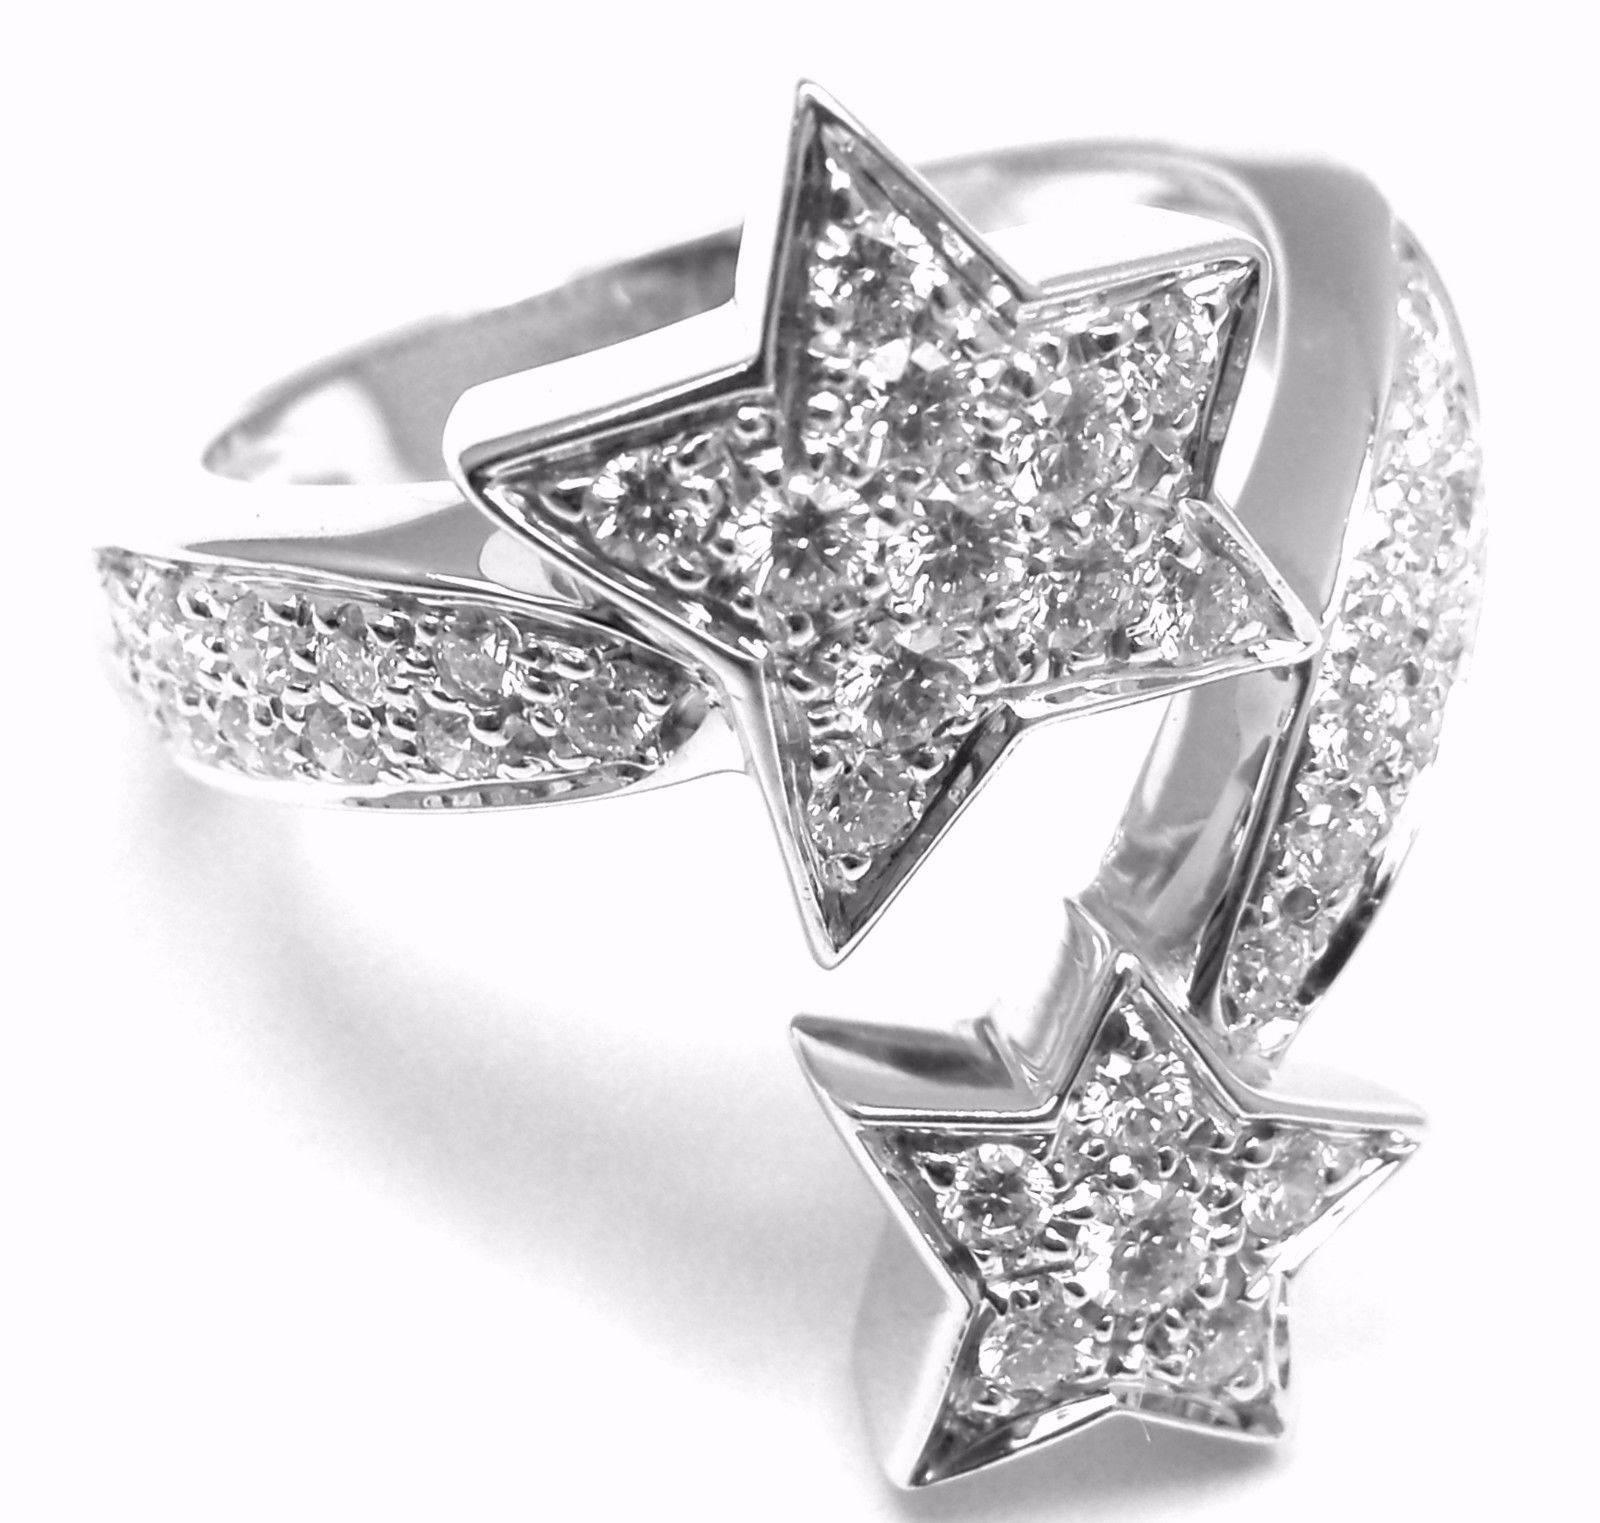 18k White Gold Comete Diamond Star Ring by Chanel. 
With 30 Round Brilliant Cut Diamonds, VVS1 Clarity E color. Total diamond weight: 1ct. 
This gorgeous ring comes with its original Cartier certificate and box. 

Details: 
Ring Size: European 50 US